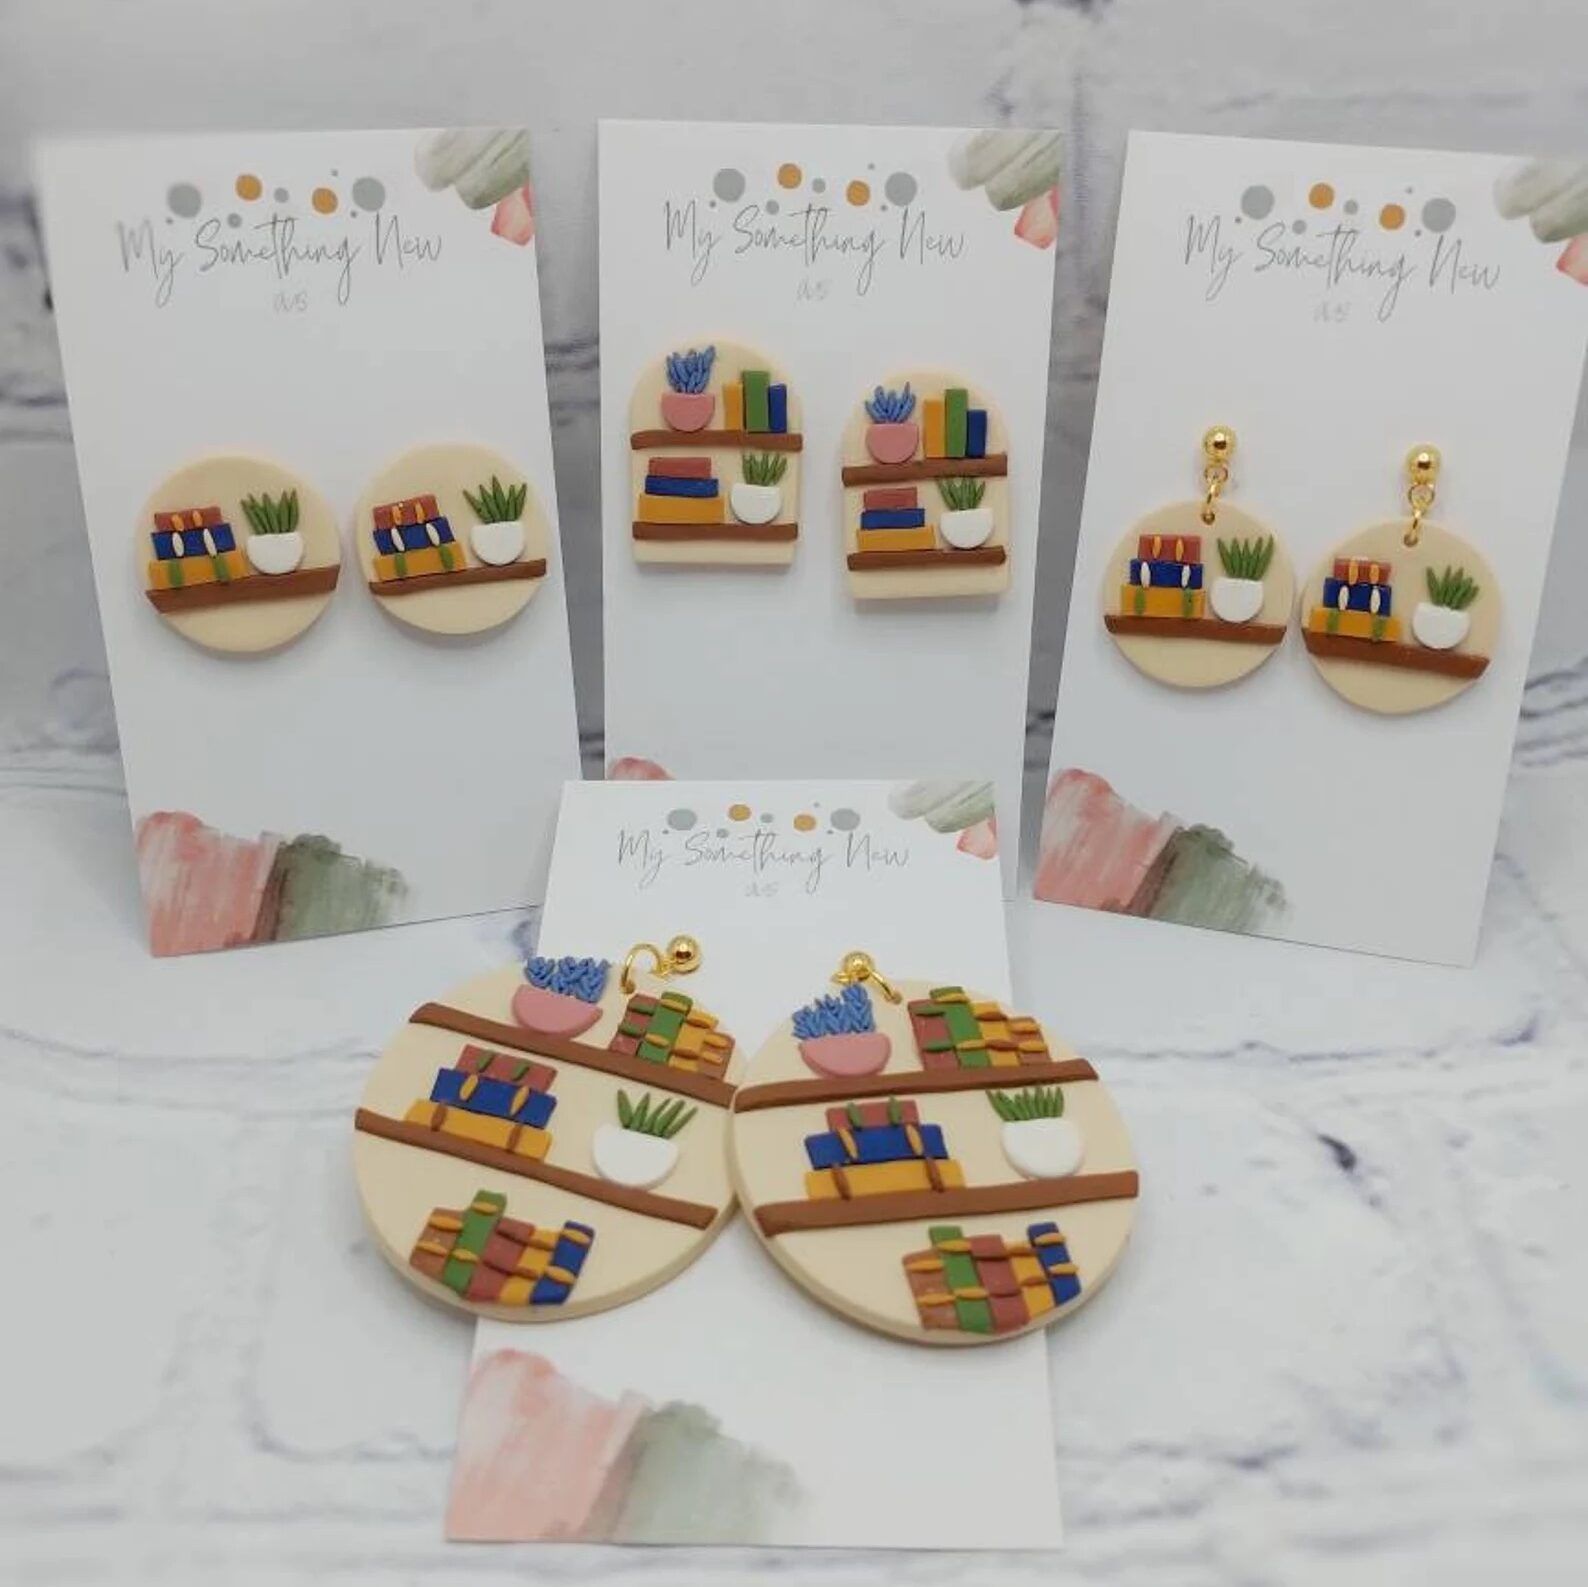 Five pairs of earrings decorated with multicolored books and plants.